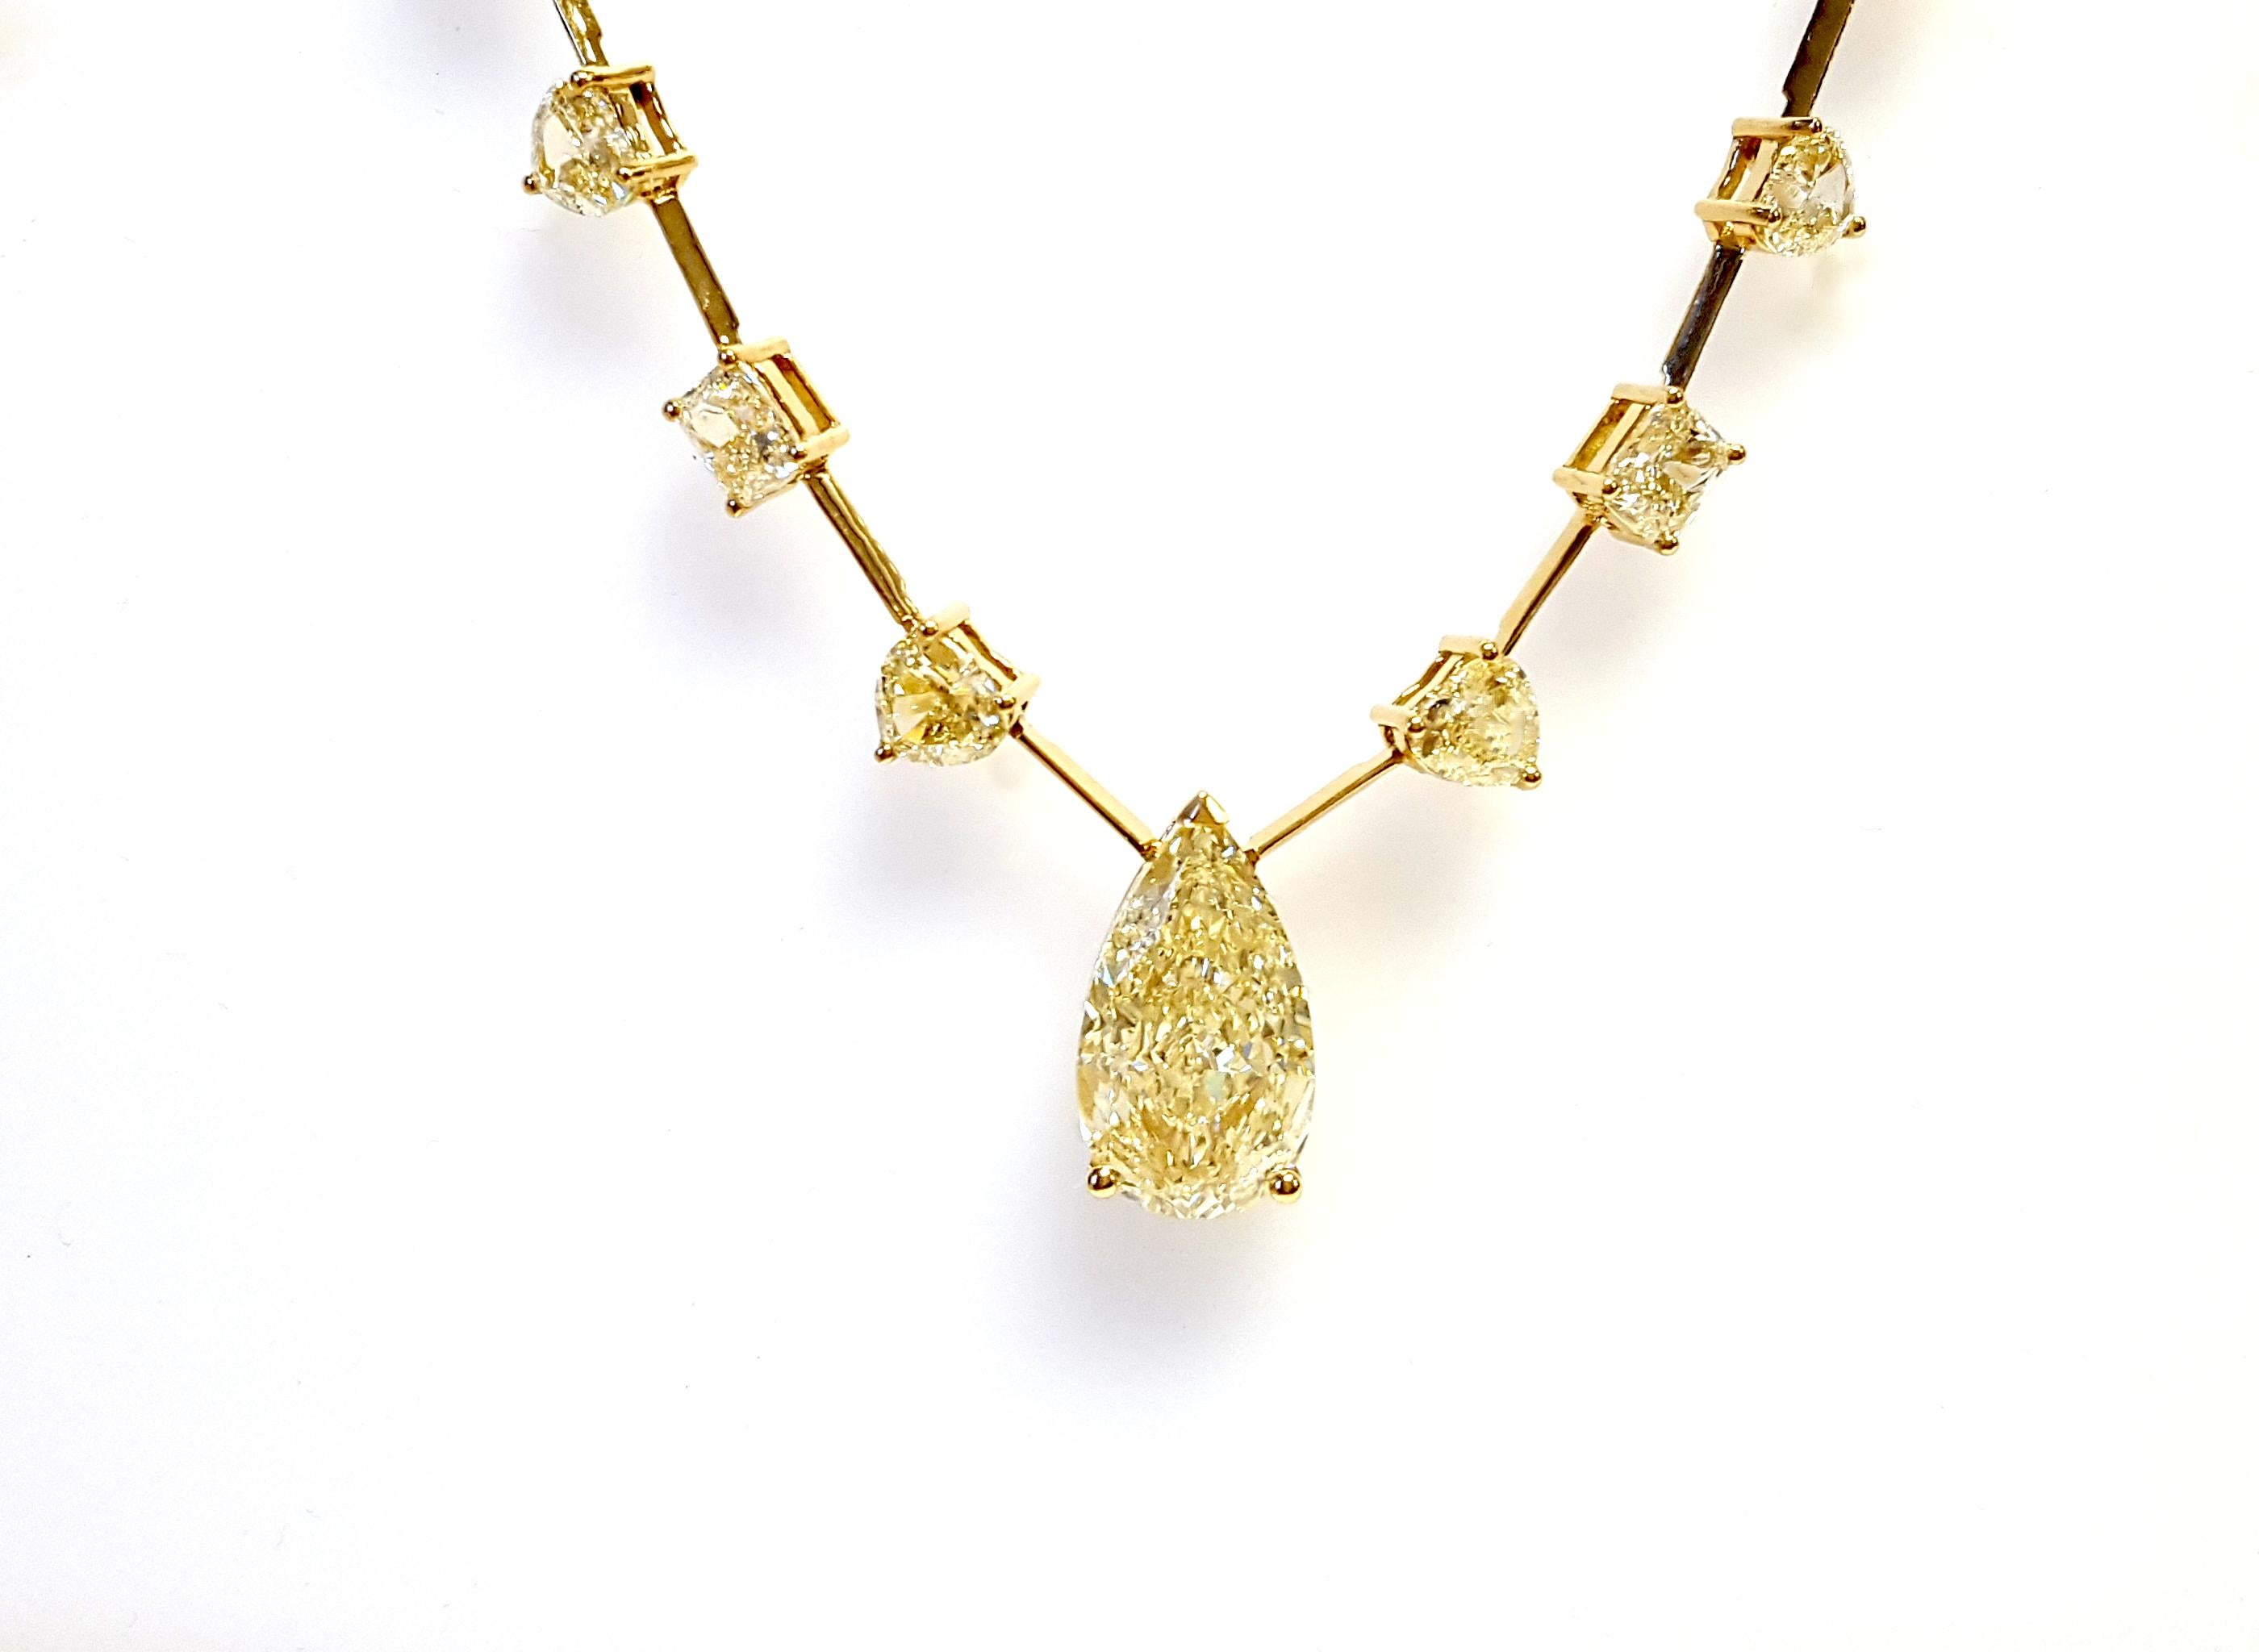 Modern 22.06 Carat Natural Mix Shaped Yellow Diamond Necklace, In 18 Karat Yellow Gold. For Sale